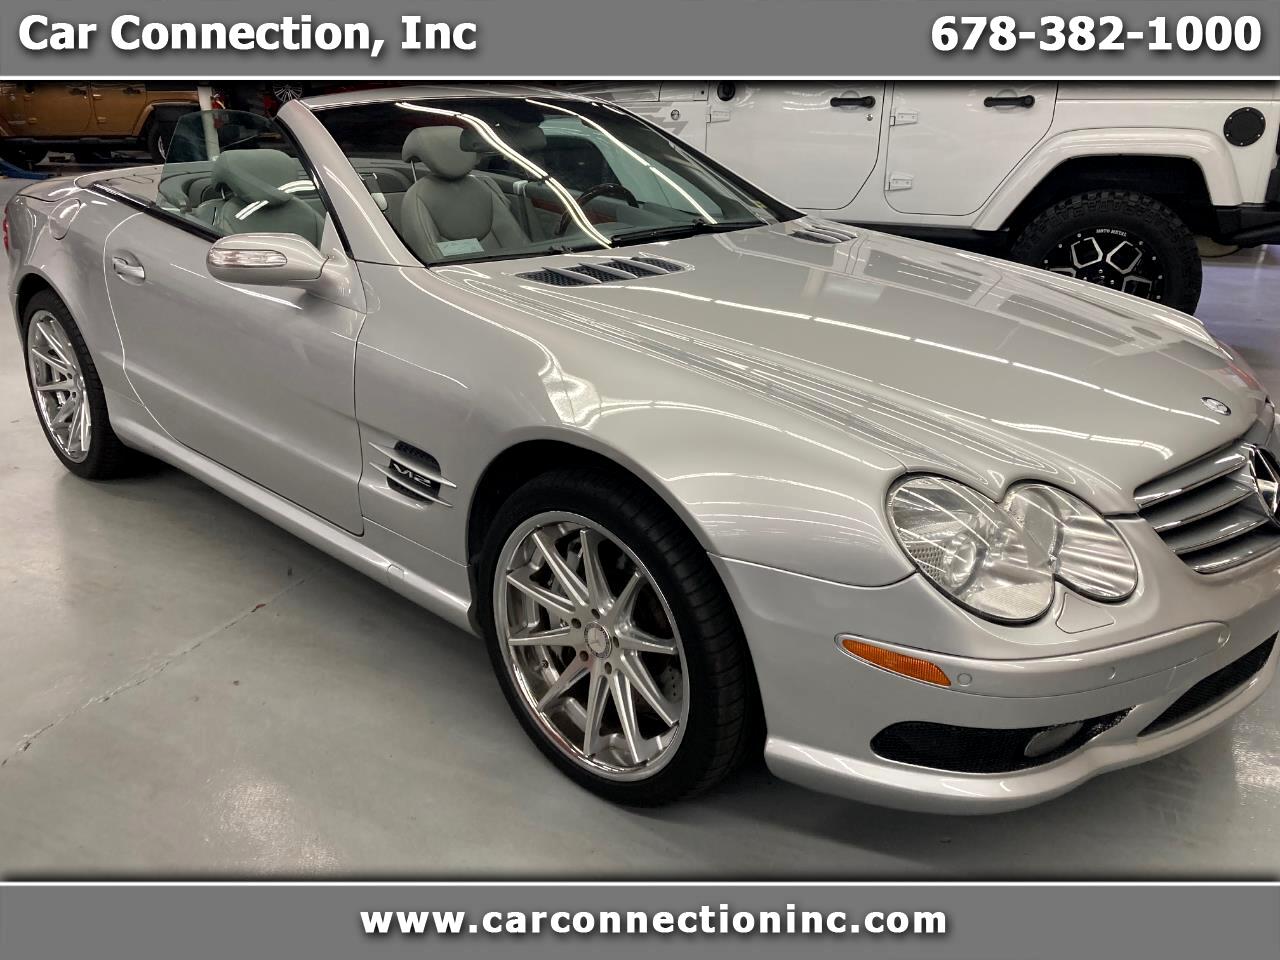 Used 2004 Mercedes-Benz SL-Class SL600 Roadster for Sale in Tucker GA 30084  Car Connection, Inc